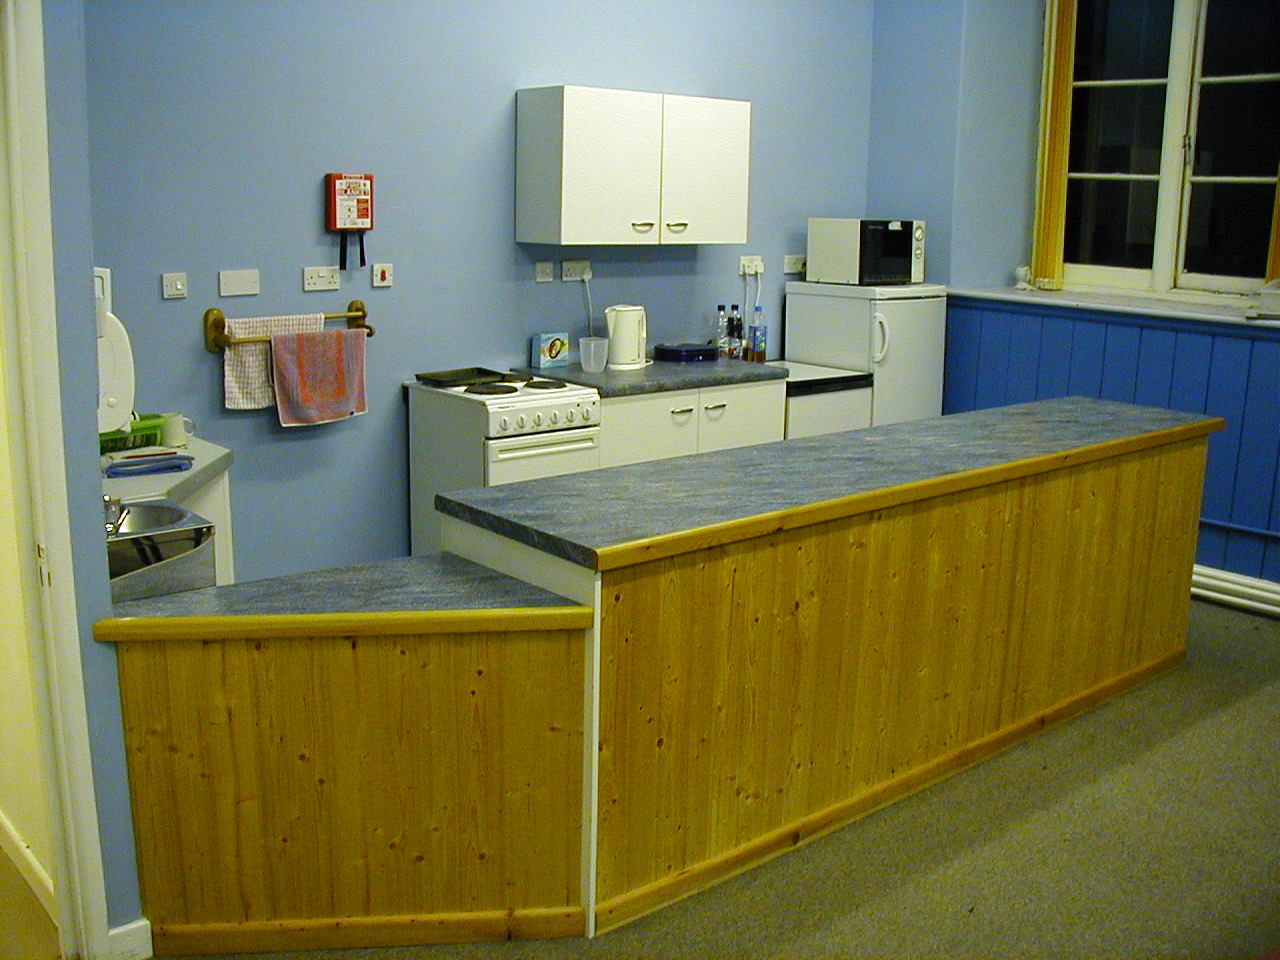 CHYP Drop in Kitchen &
                        Counter